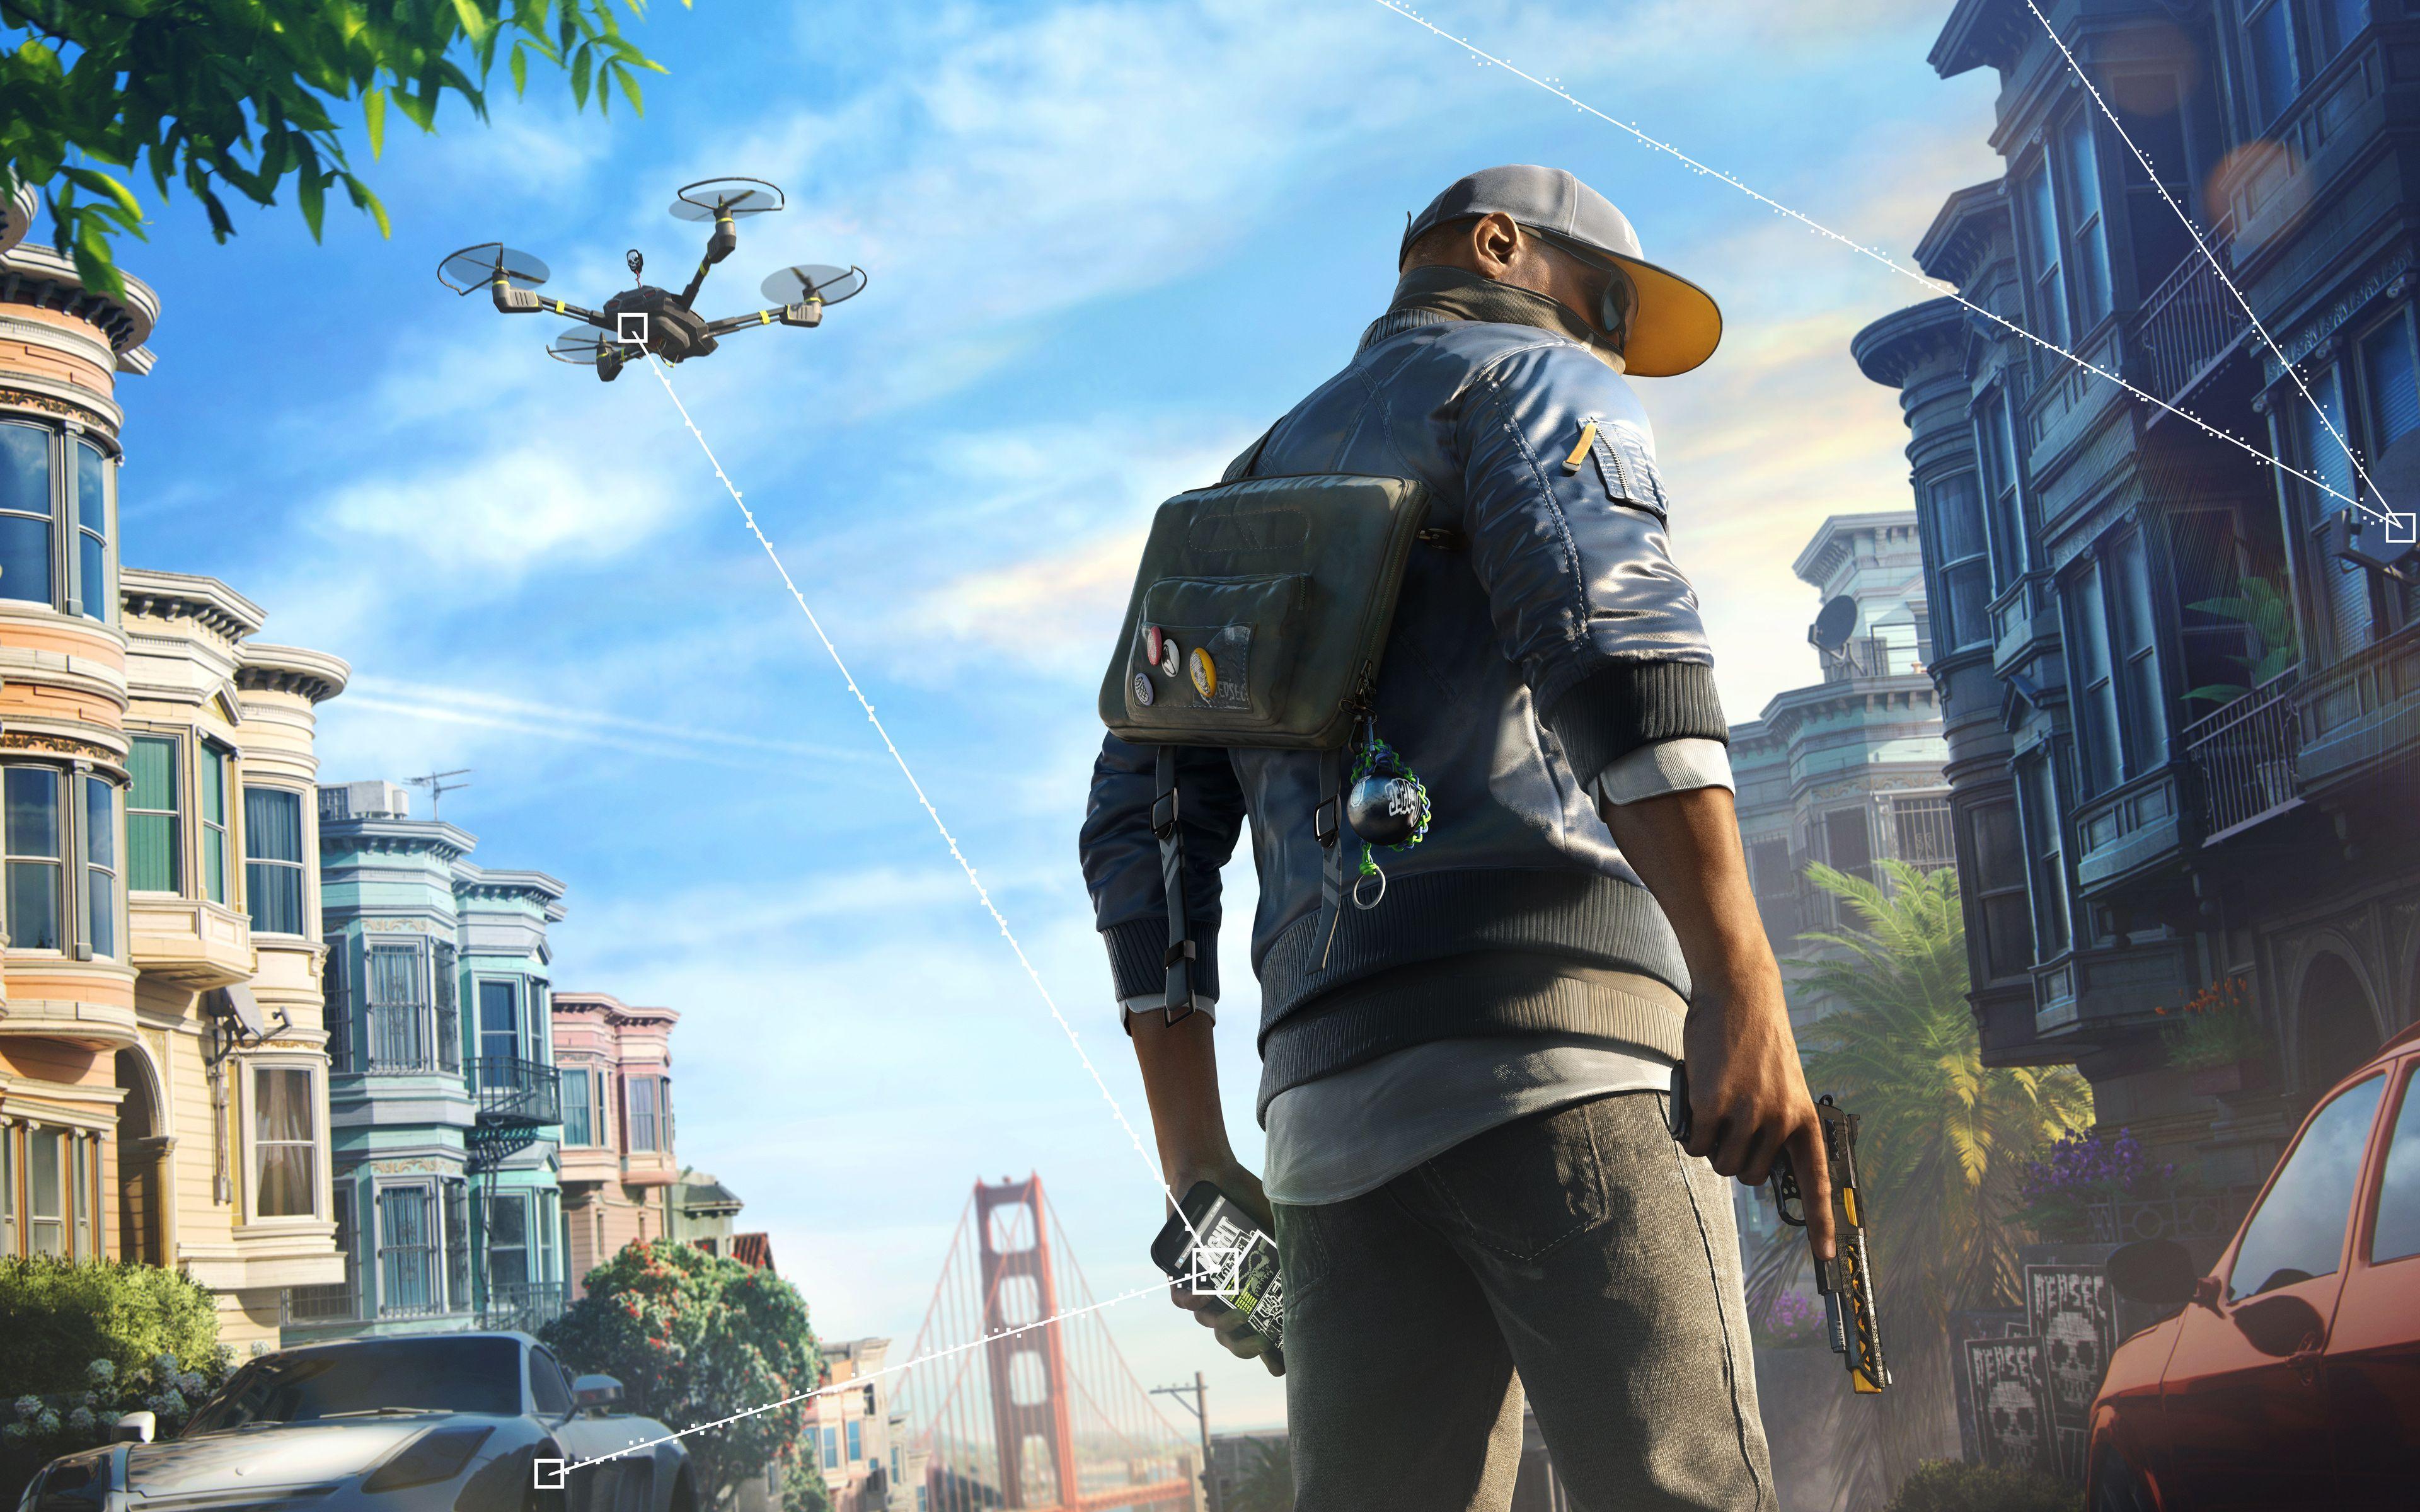 watch dogs 2 free